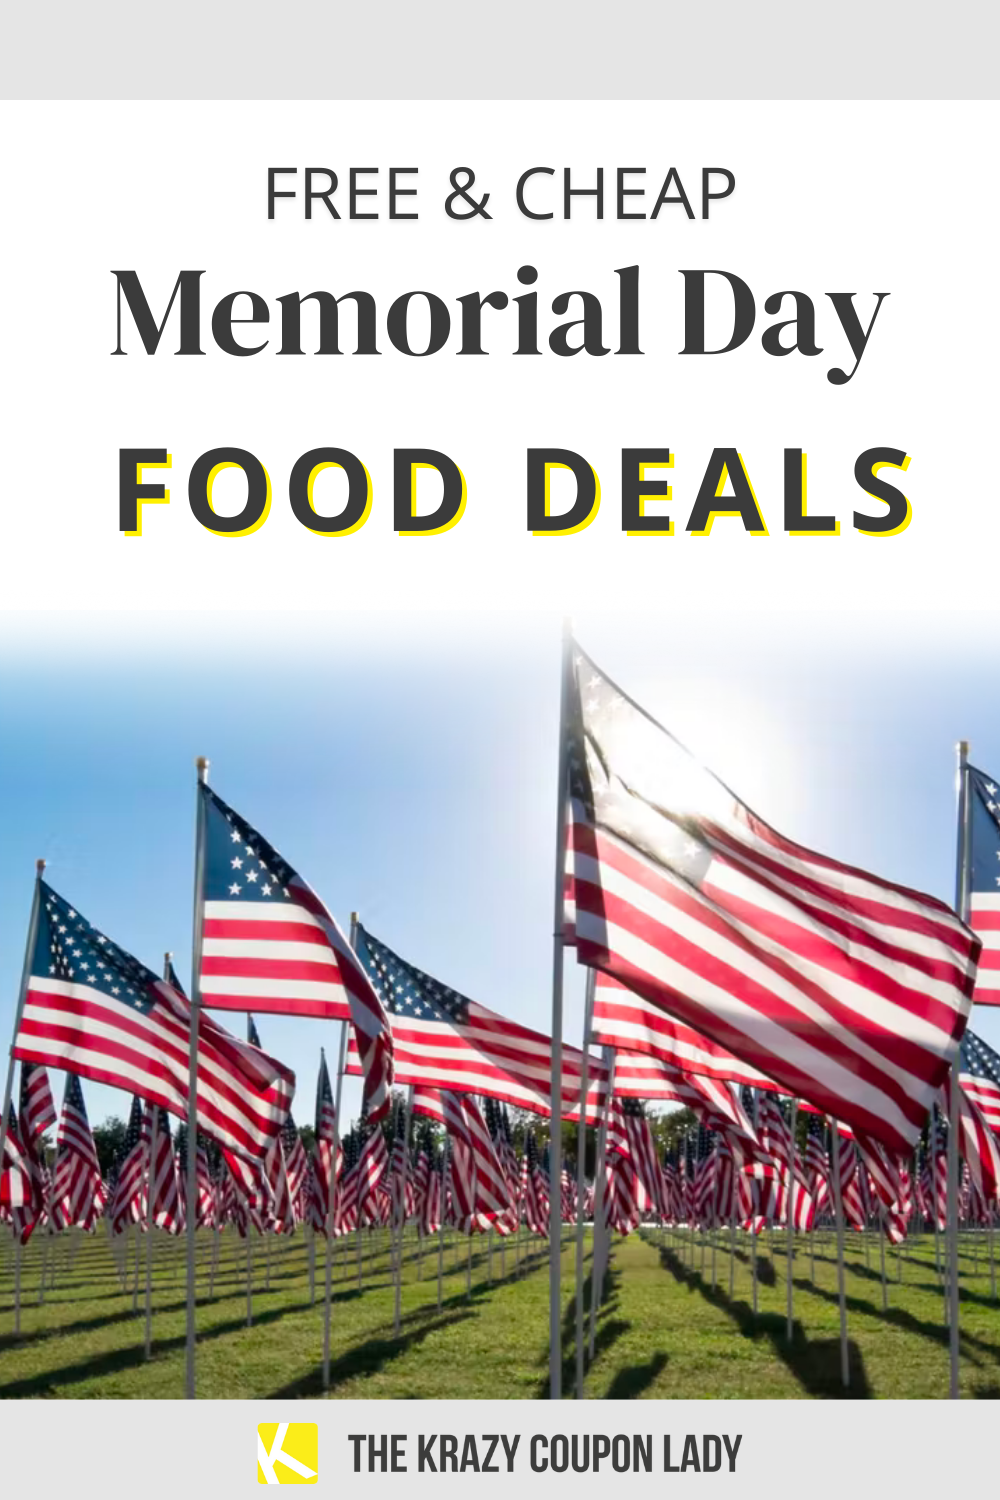 https://thekrazycouponlady.com/wp-content/uploads/2021/05/all-the-free-cheap-memorial-day-food-deals-1653511284-1653511285.png